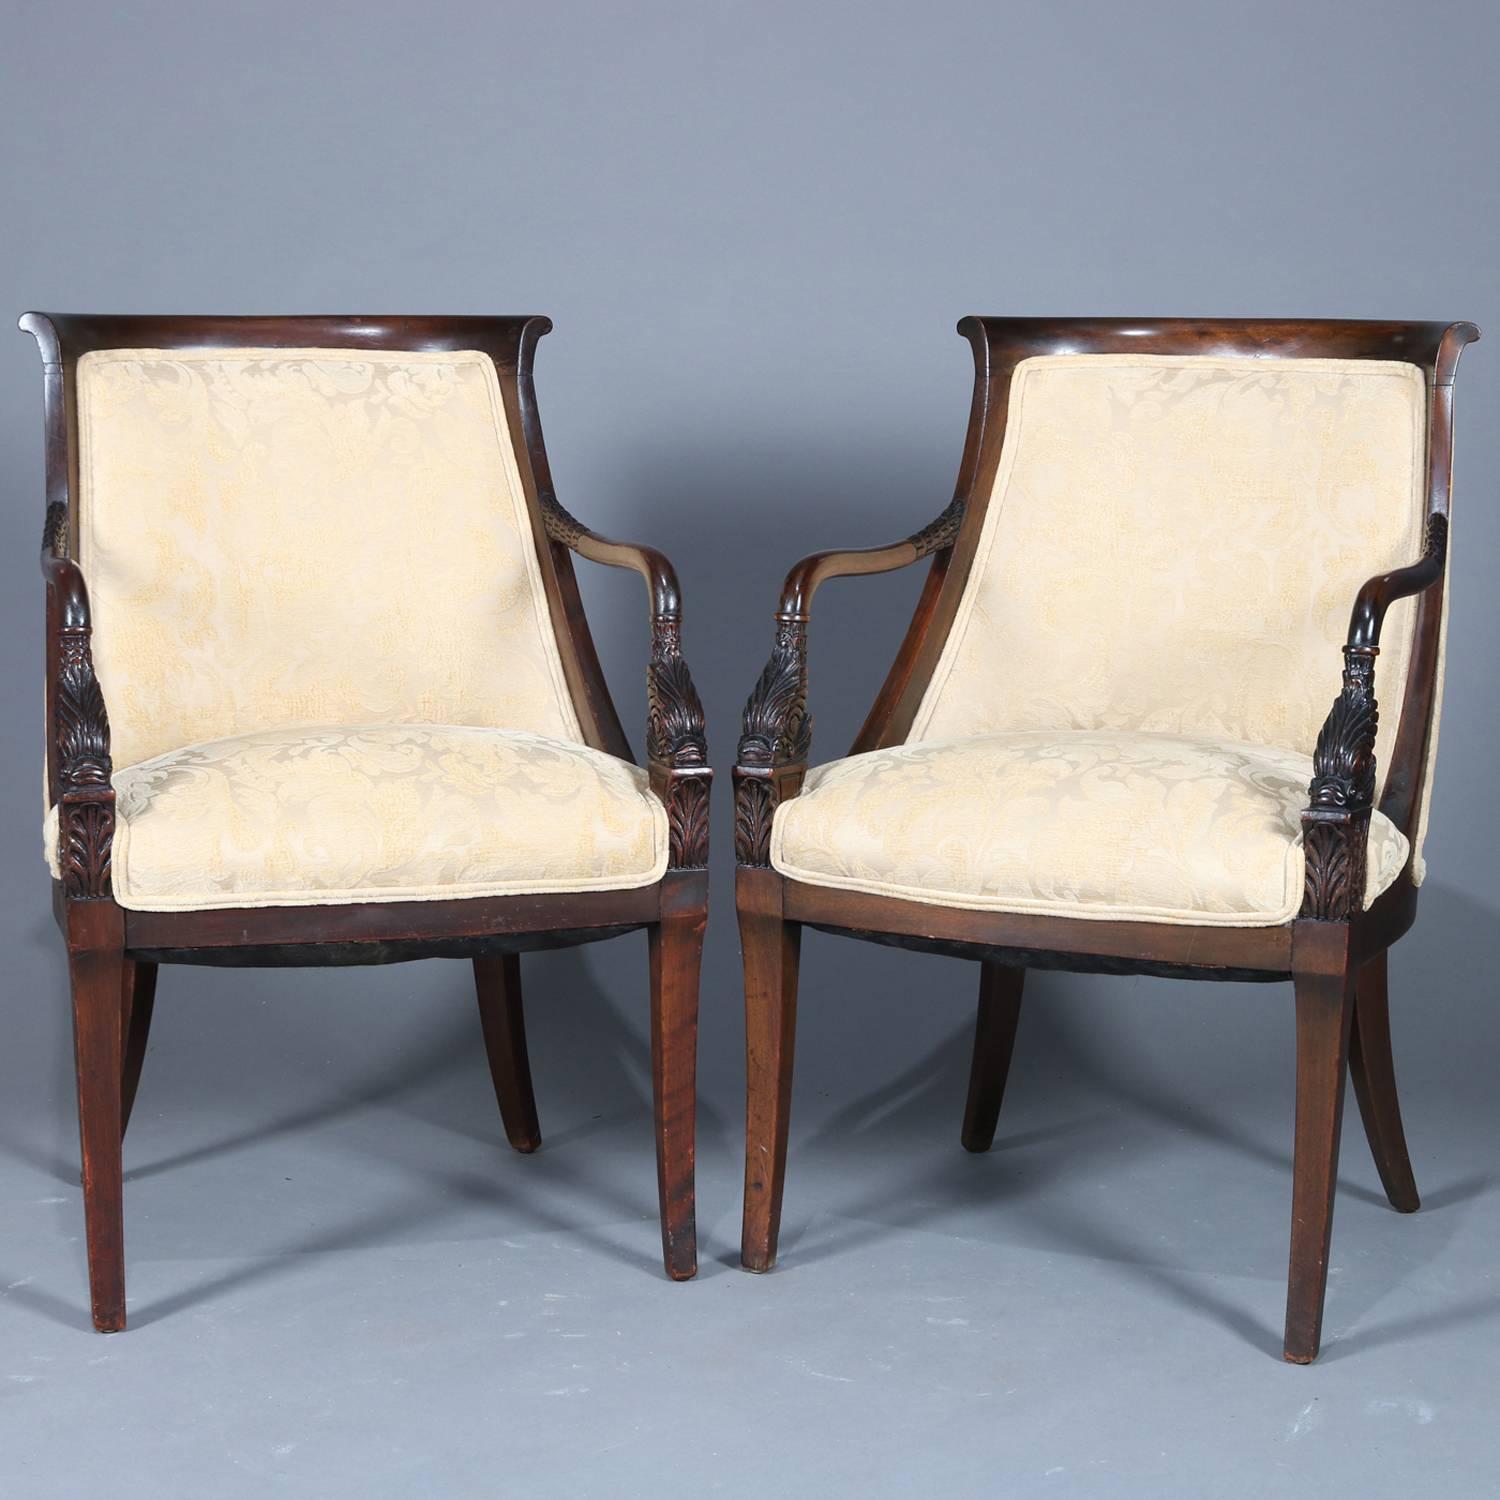 Antique pair of figural Continental carved mahogany chairs feature open arms with cared dolphins and raised on flared and tapered legs, upholstered, 19th century

Measures: 37.5